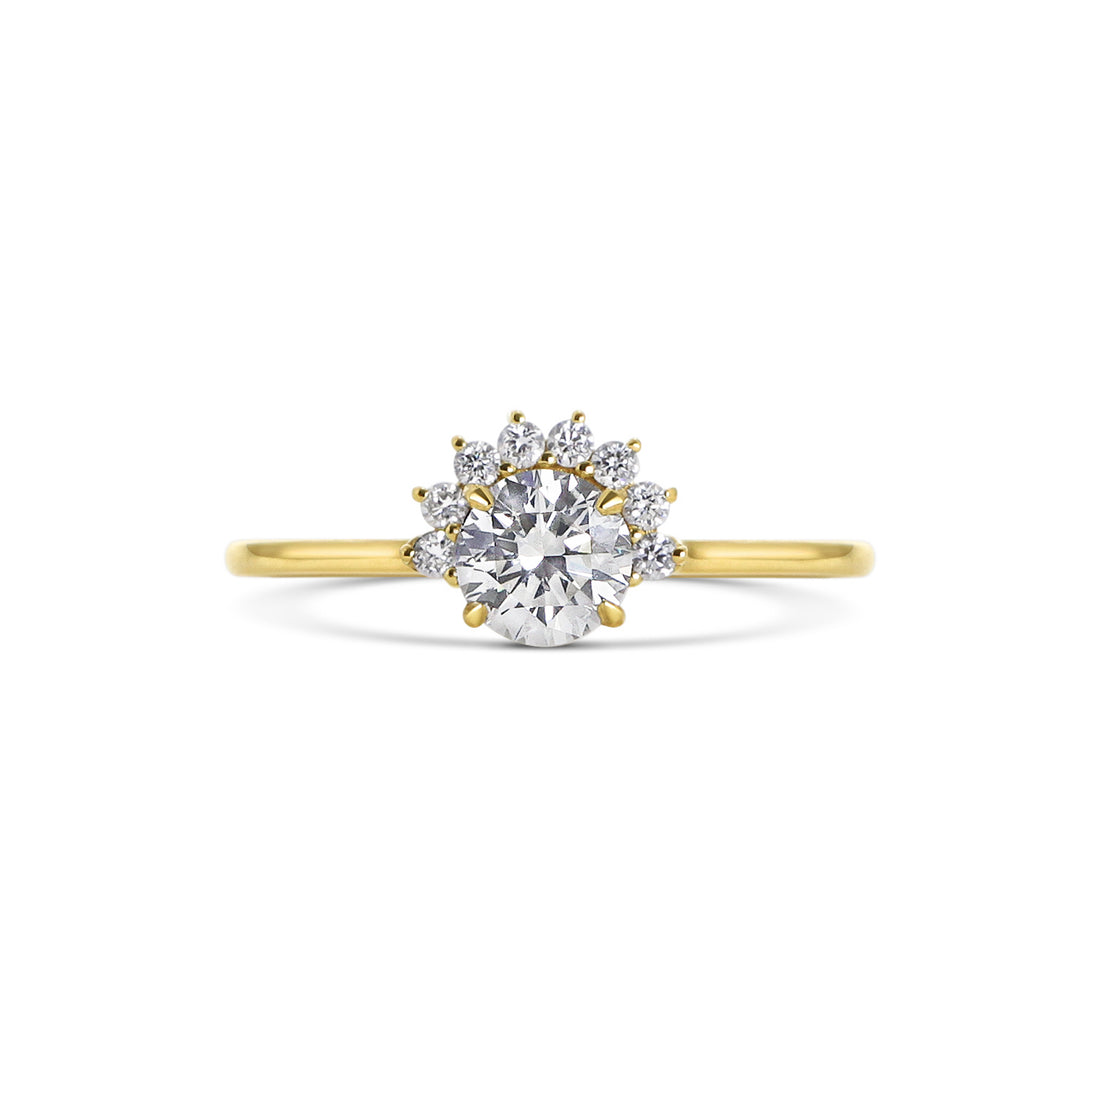  Sunrise Diamond Ring by Michelle Oh | The Cut London